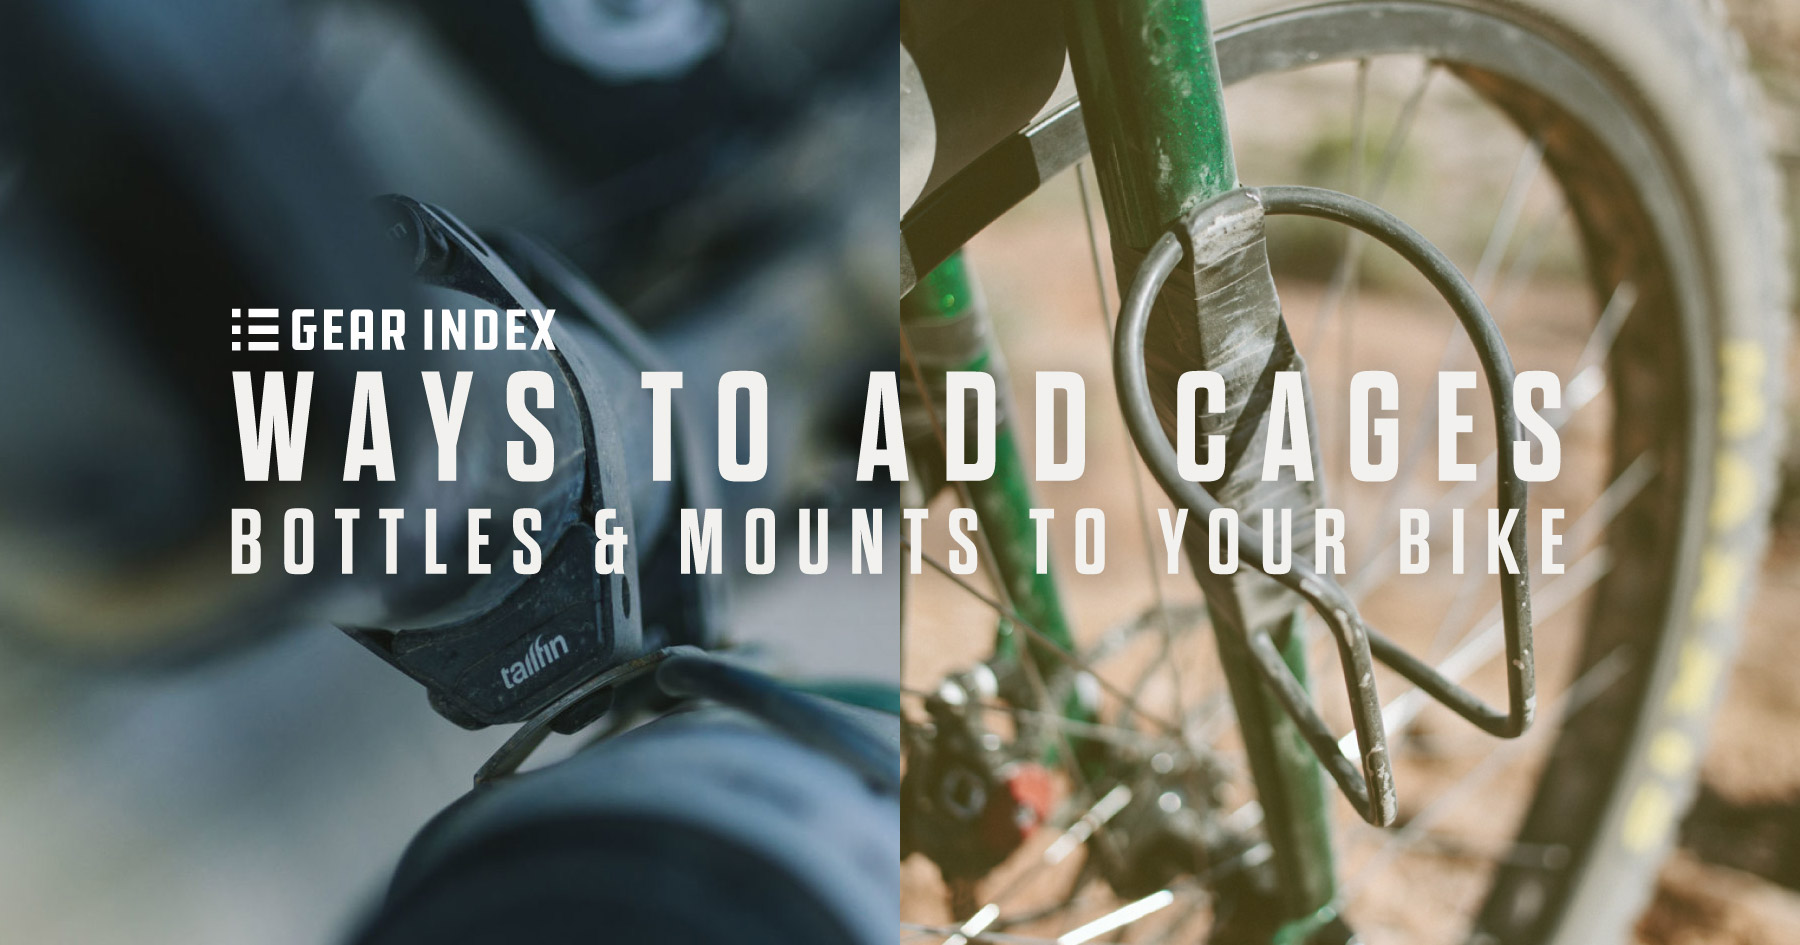 Attach Water Bottles and Add Cage Mounts to Your Bike